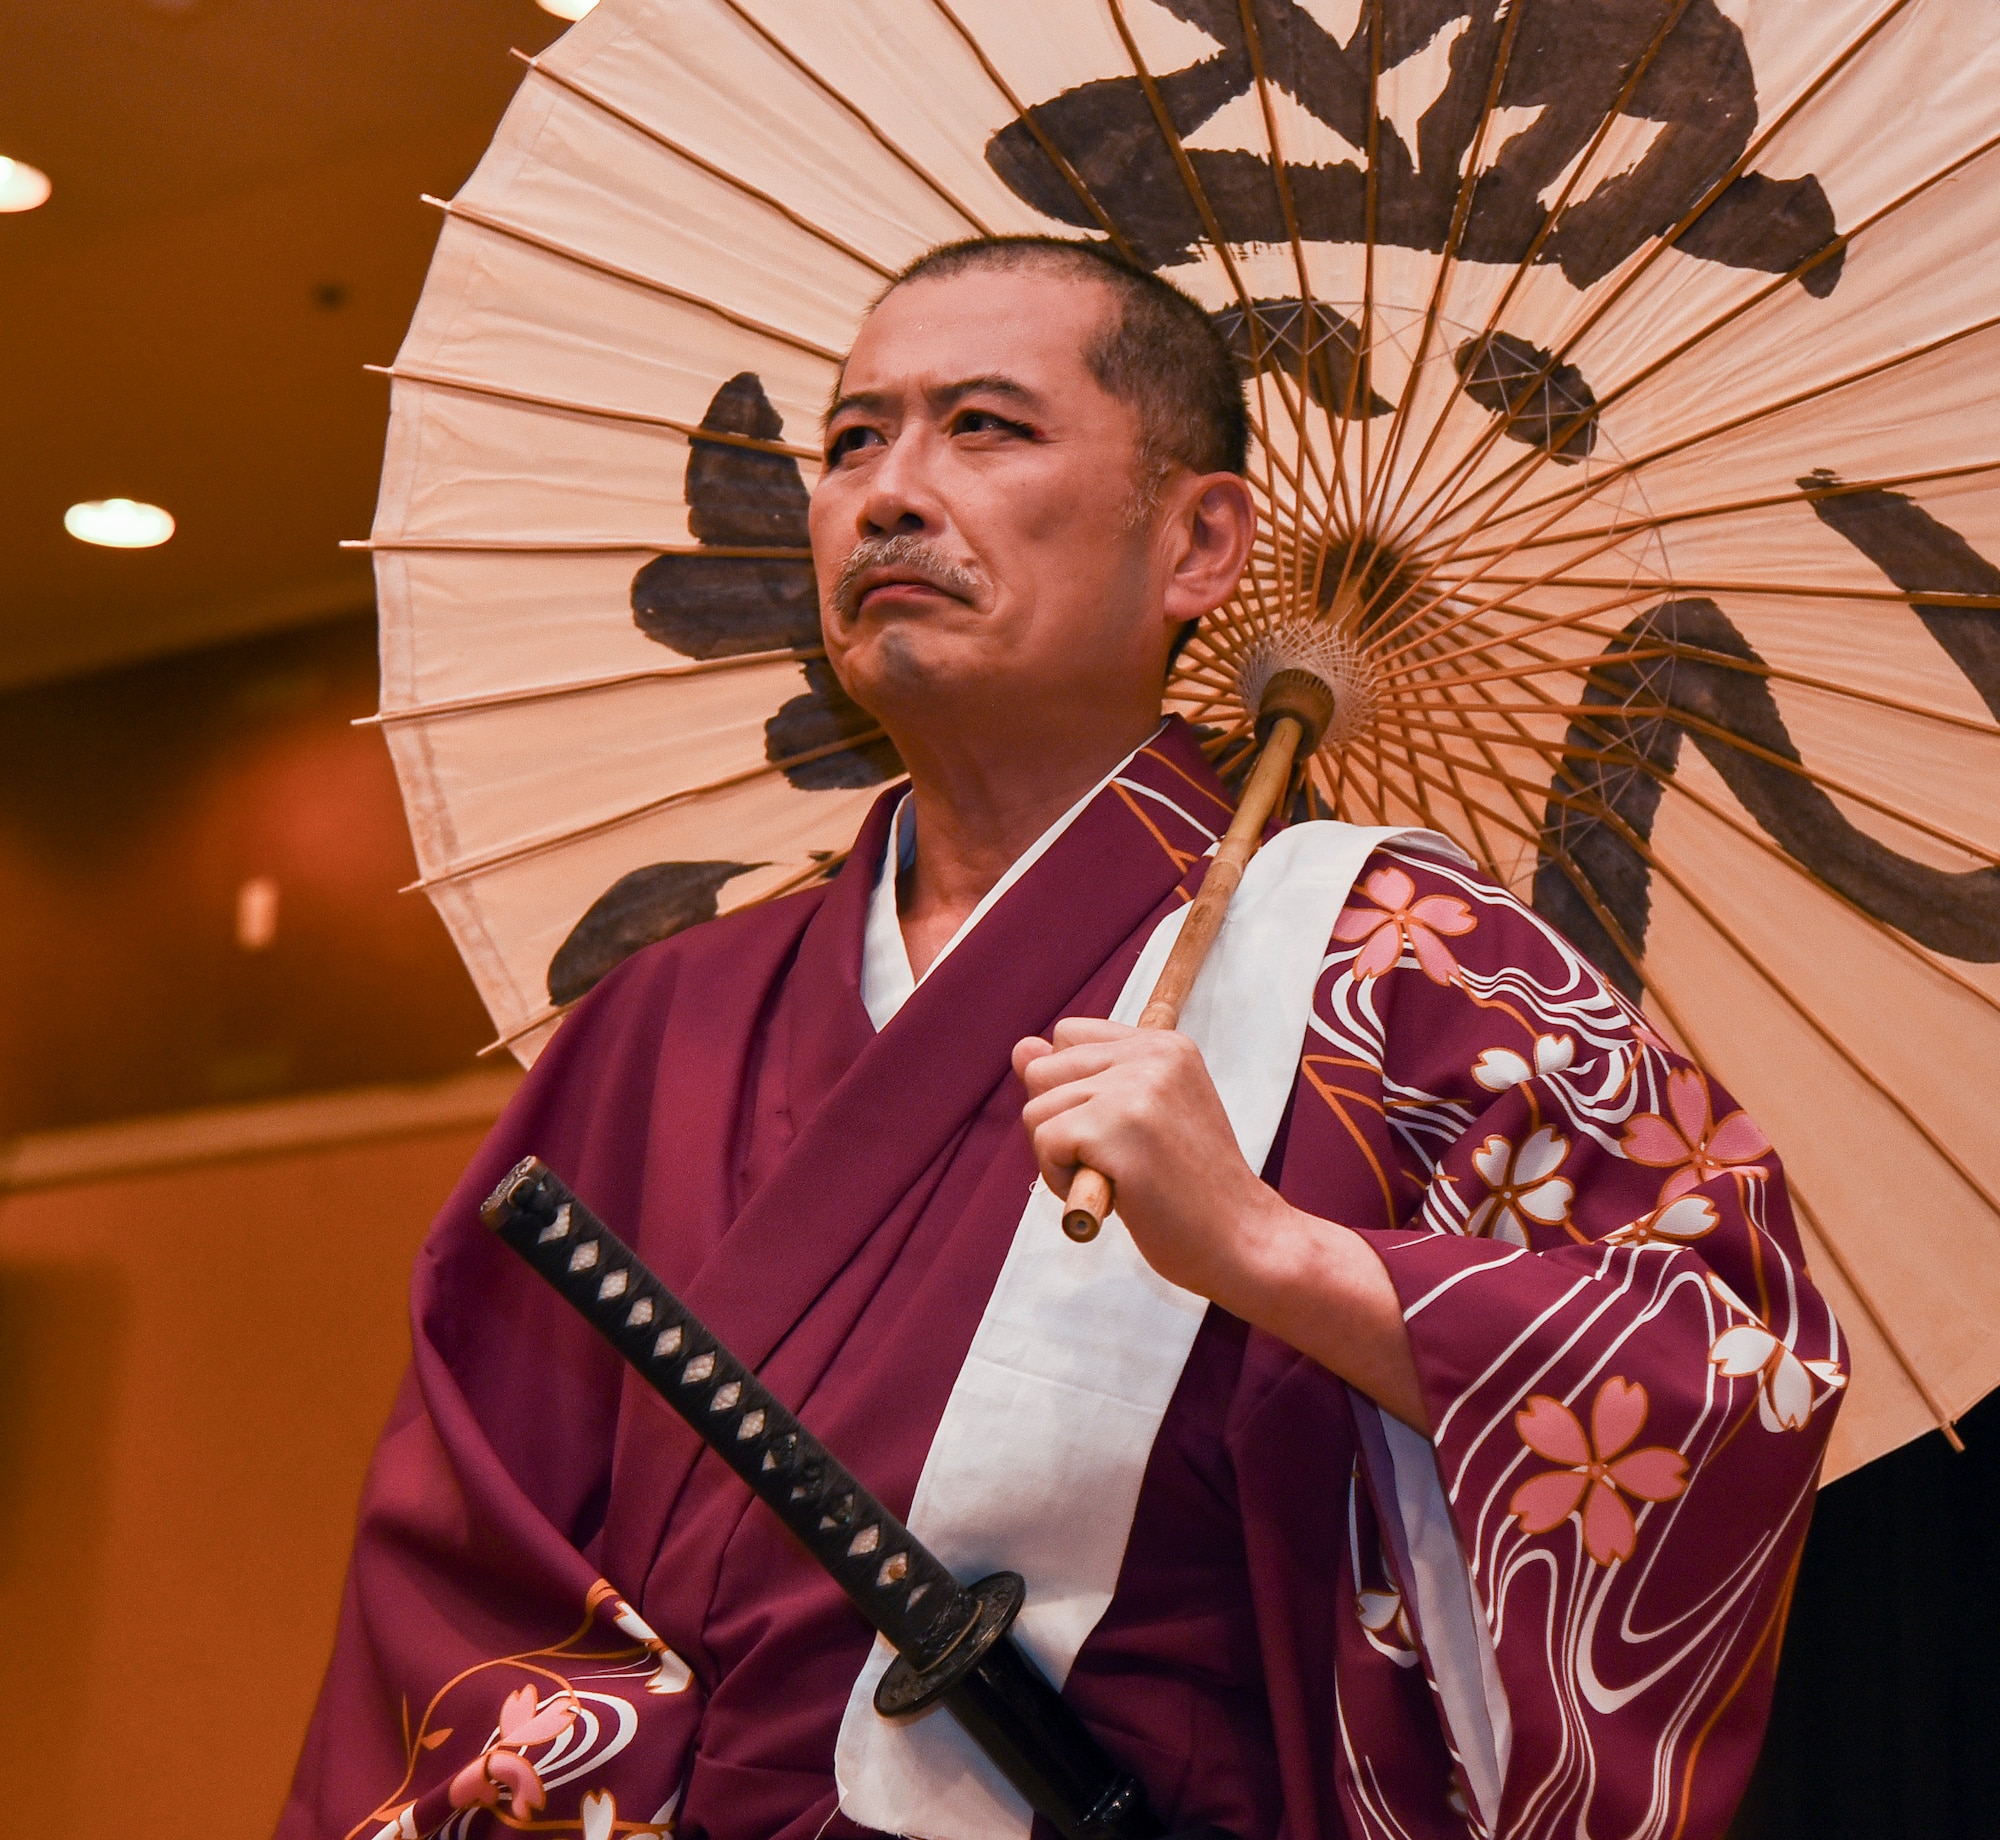 A Japanese storyteller stands in character during a traditional Japanese play at Misawa Air Base, Japan, April 6, 2019. The Japanese storytelling was a performance consisting of traditional dances, songs played with traditional instruments and acting for the 32nd Annual Japan Day, which shared Japanese culture with the base. (U.S. Air Force photo by Branden Yamada)